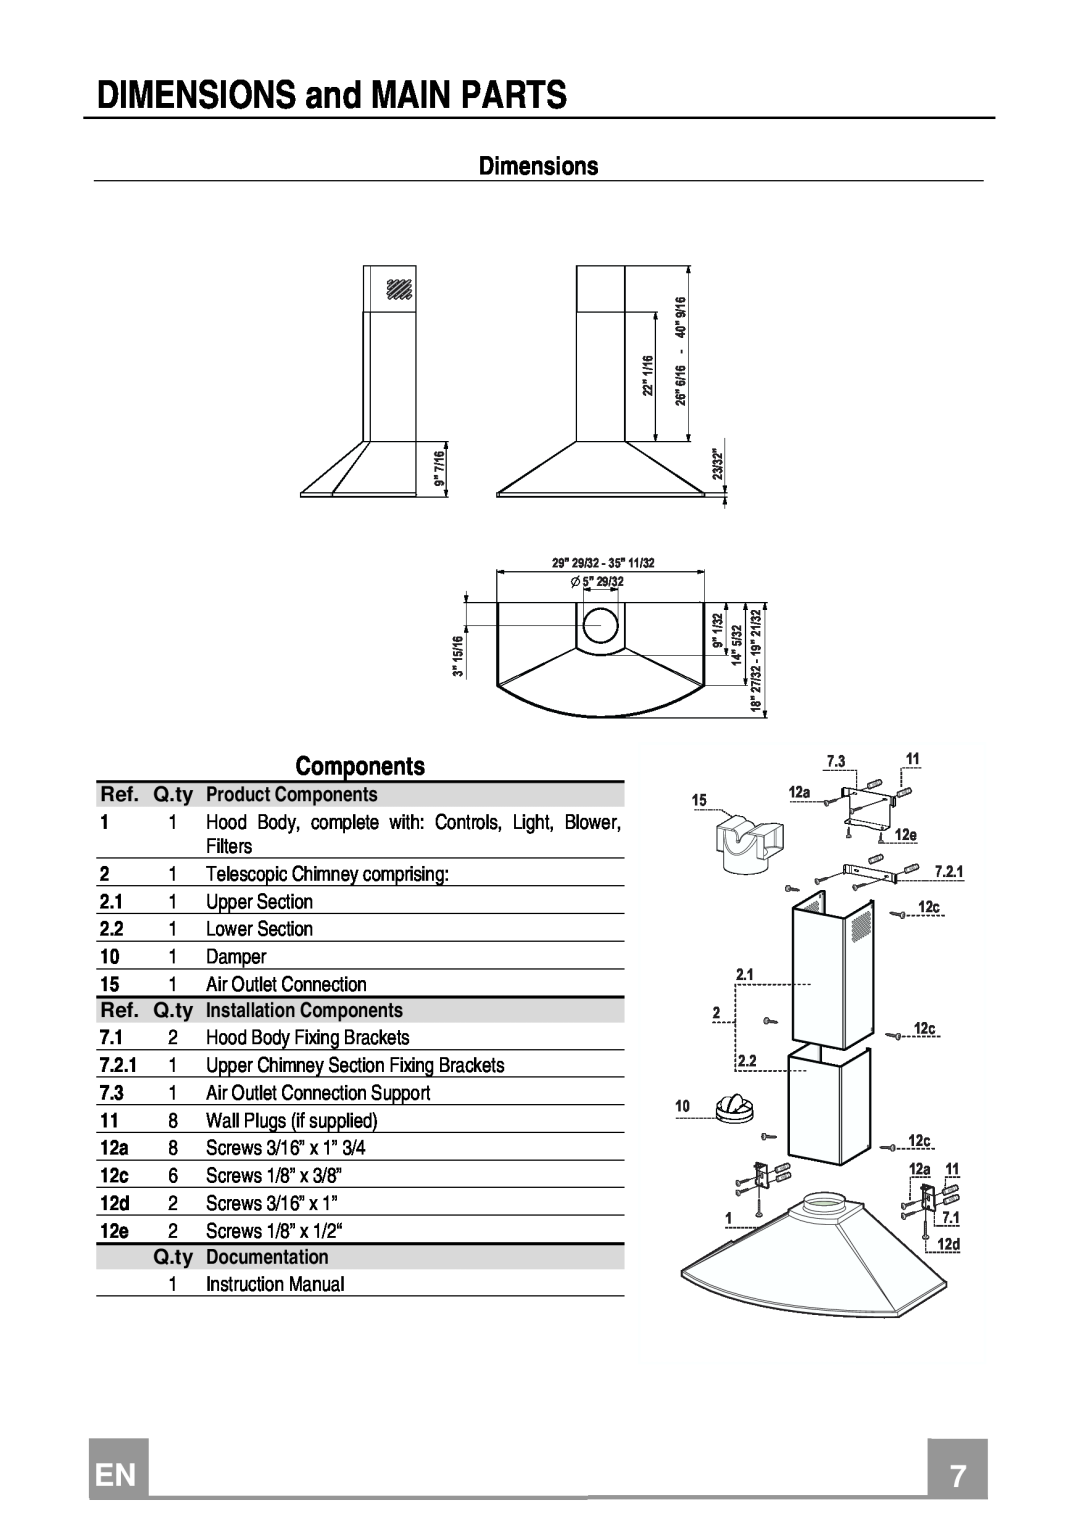 Franke Consumer Products FDS 307 W, FDS 367 W installation instructions DIMENSIONS and MAIN PARTS, Dimensions, Components 